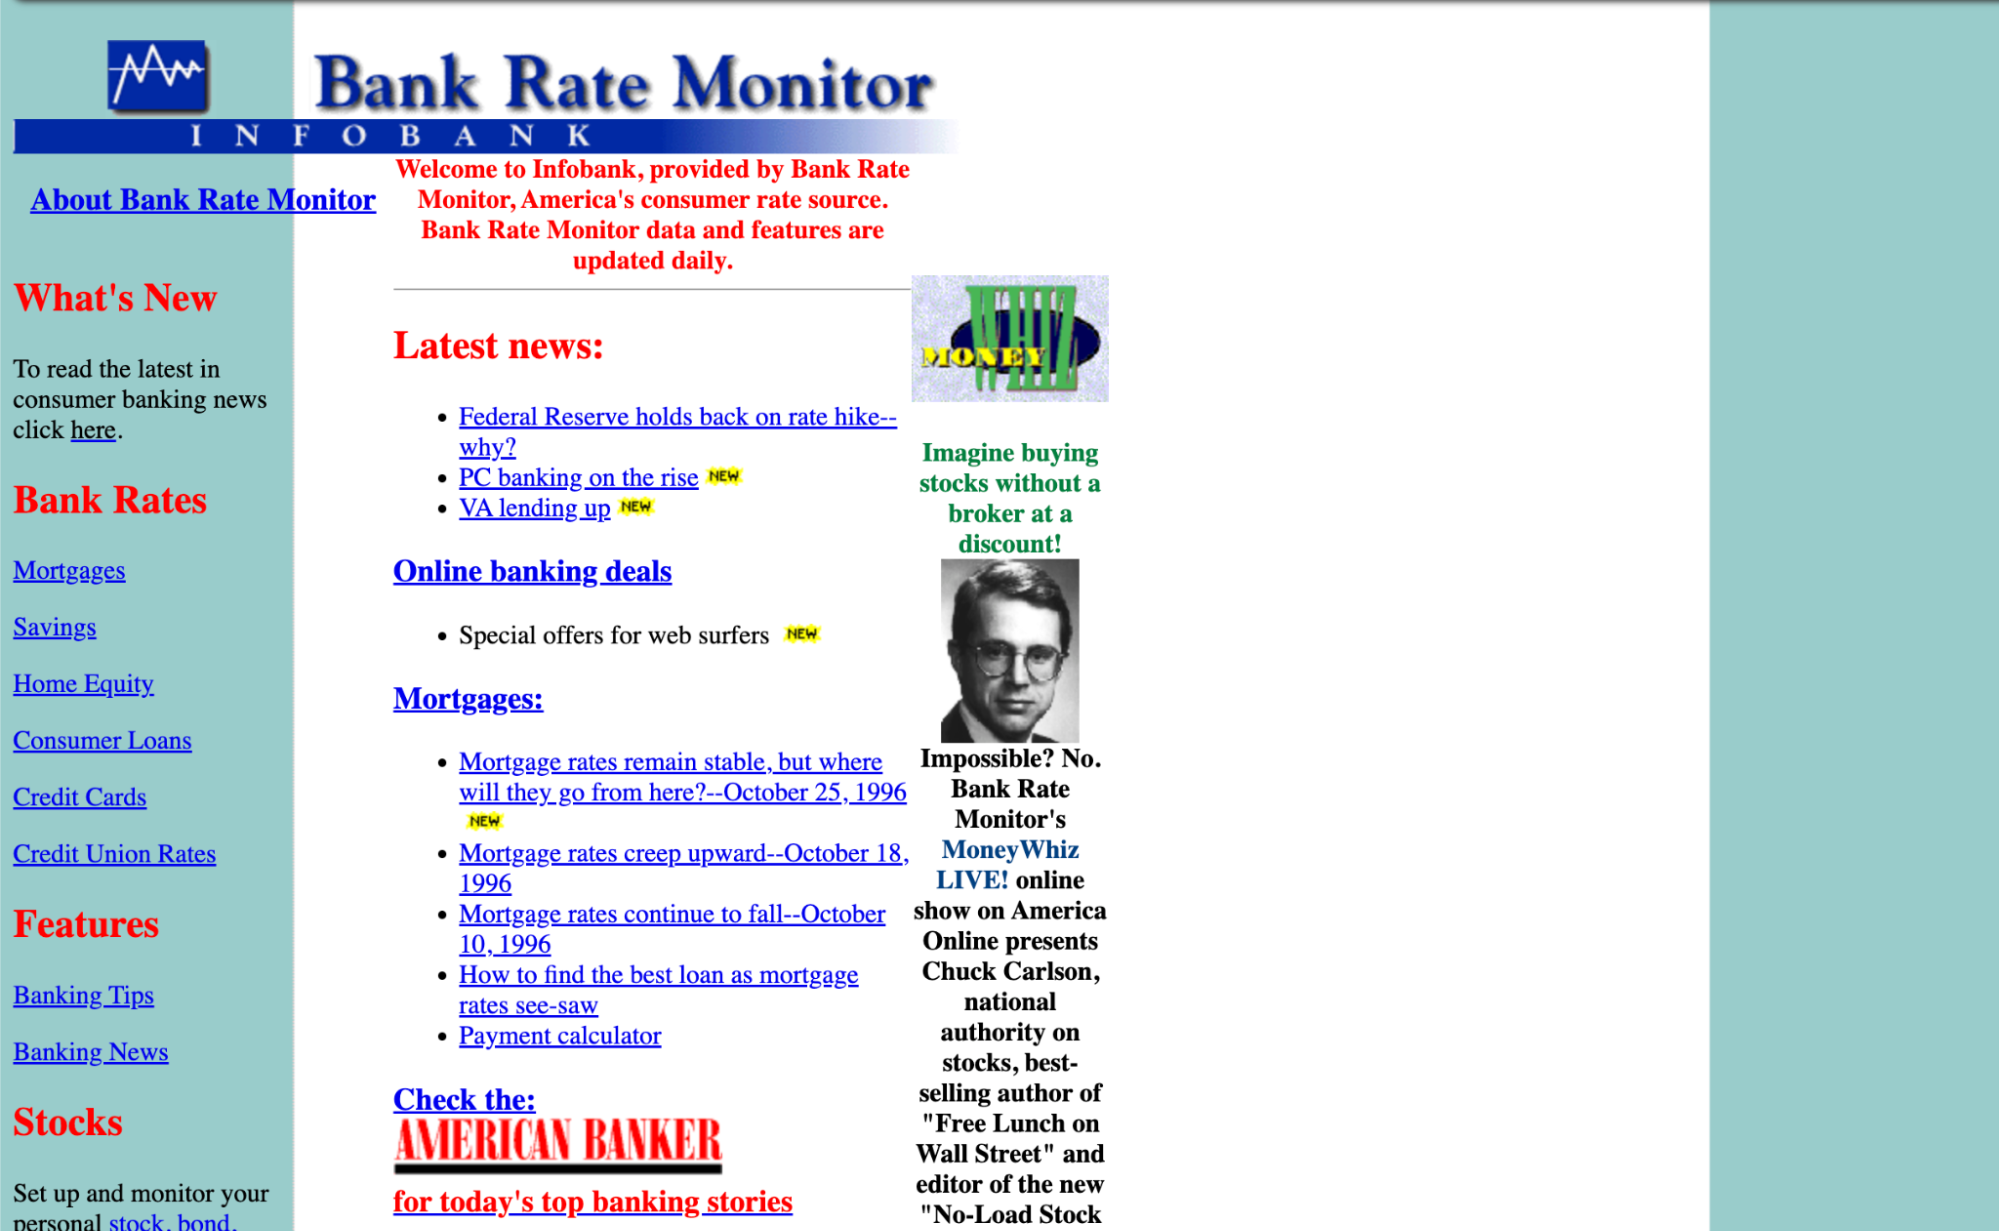 Bankrate launched its first website version in 1996